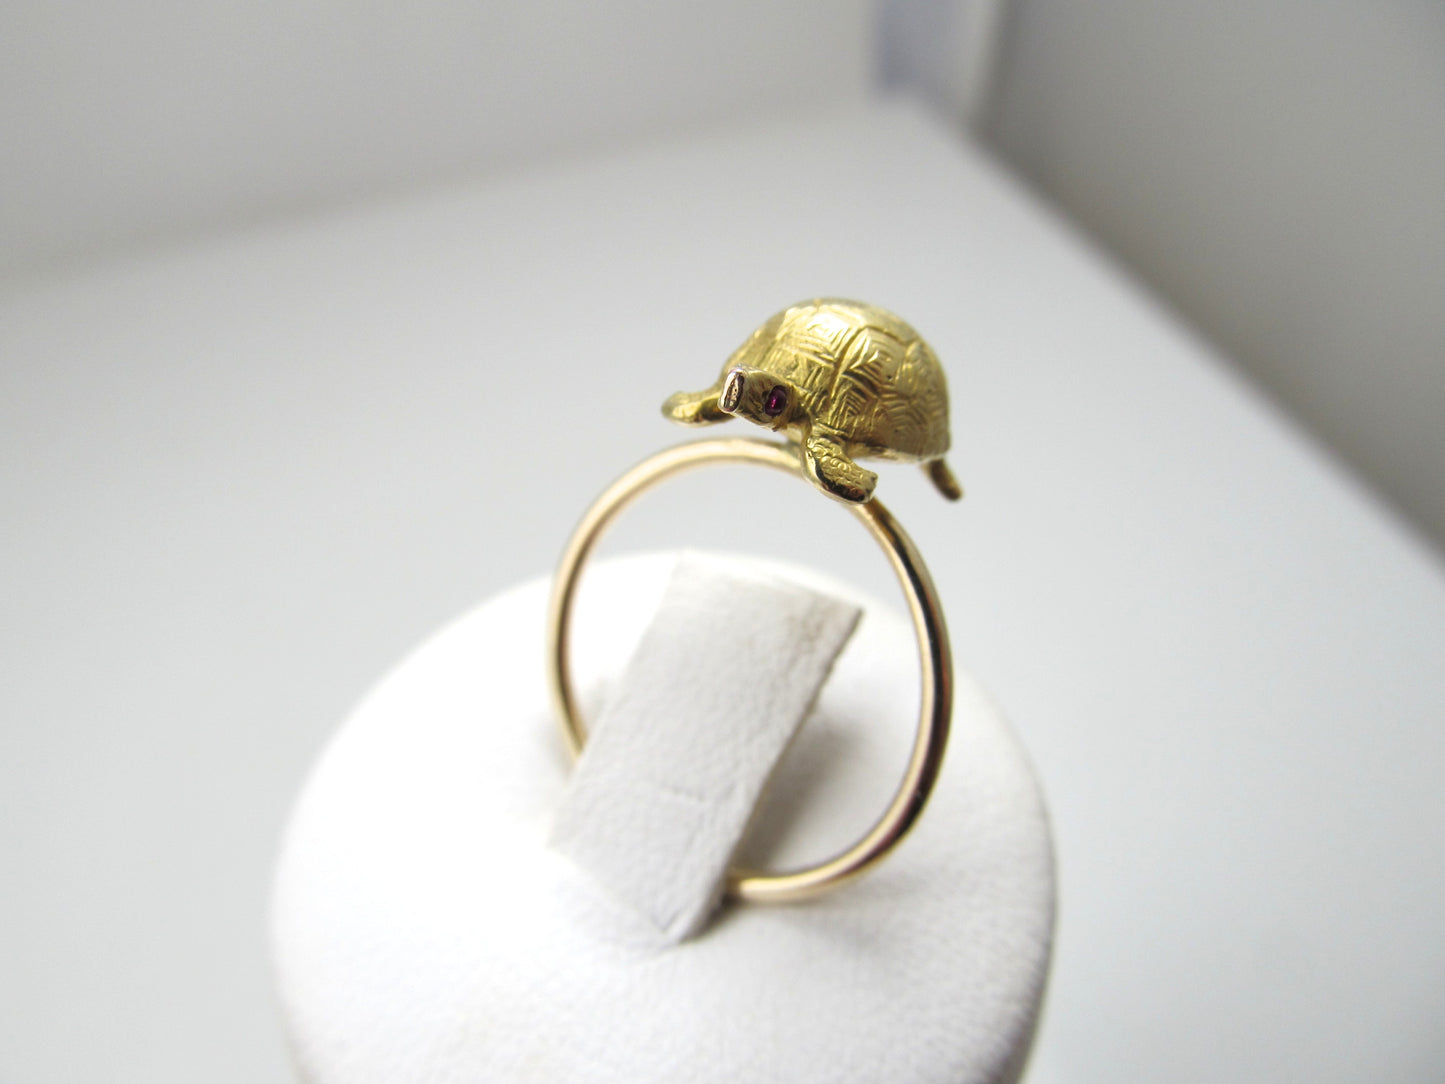 Antique turtle ring with ruby eyes, 14k yellow gold, circa 1910